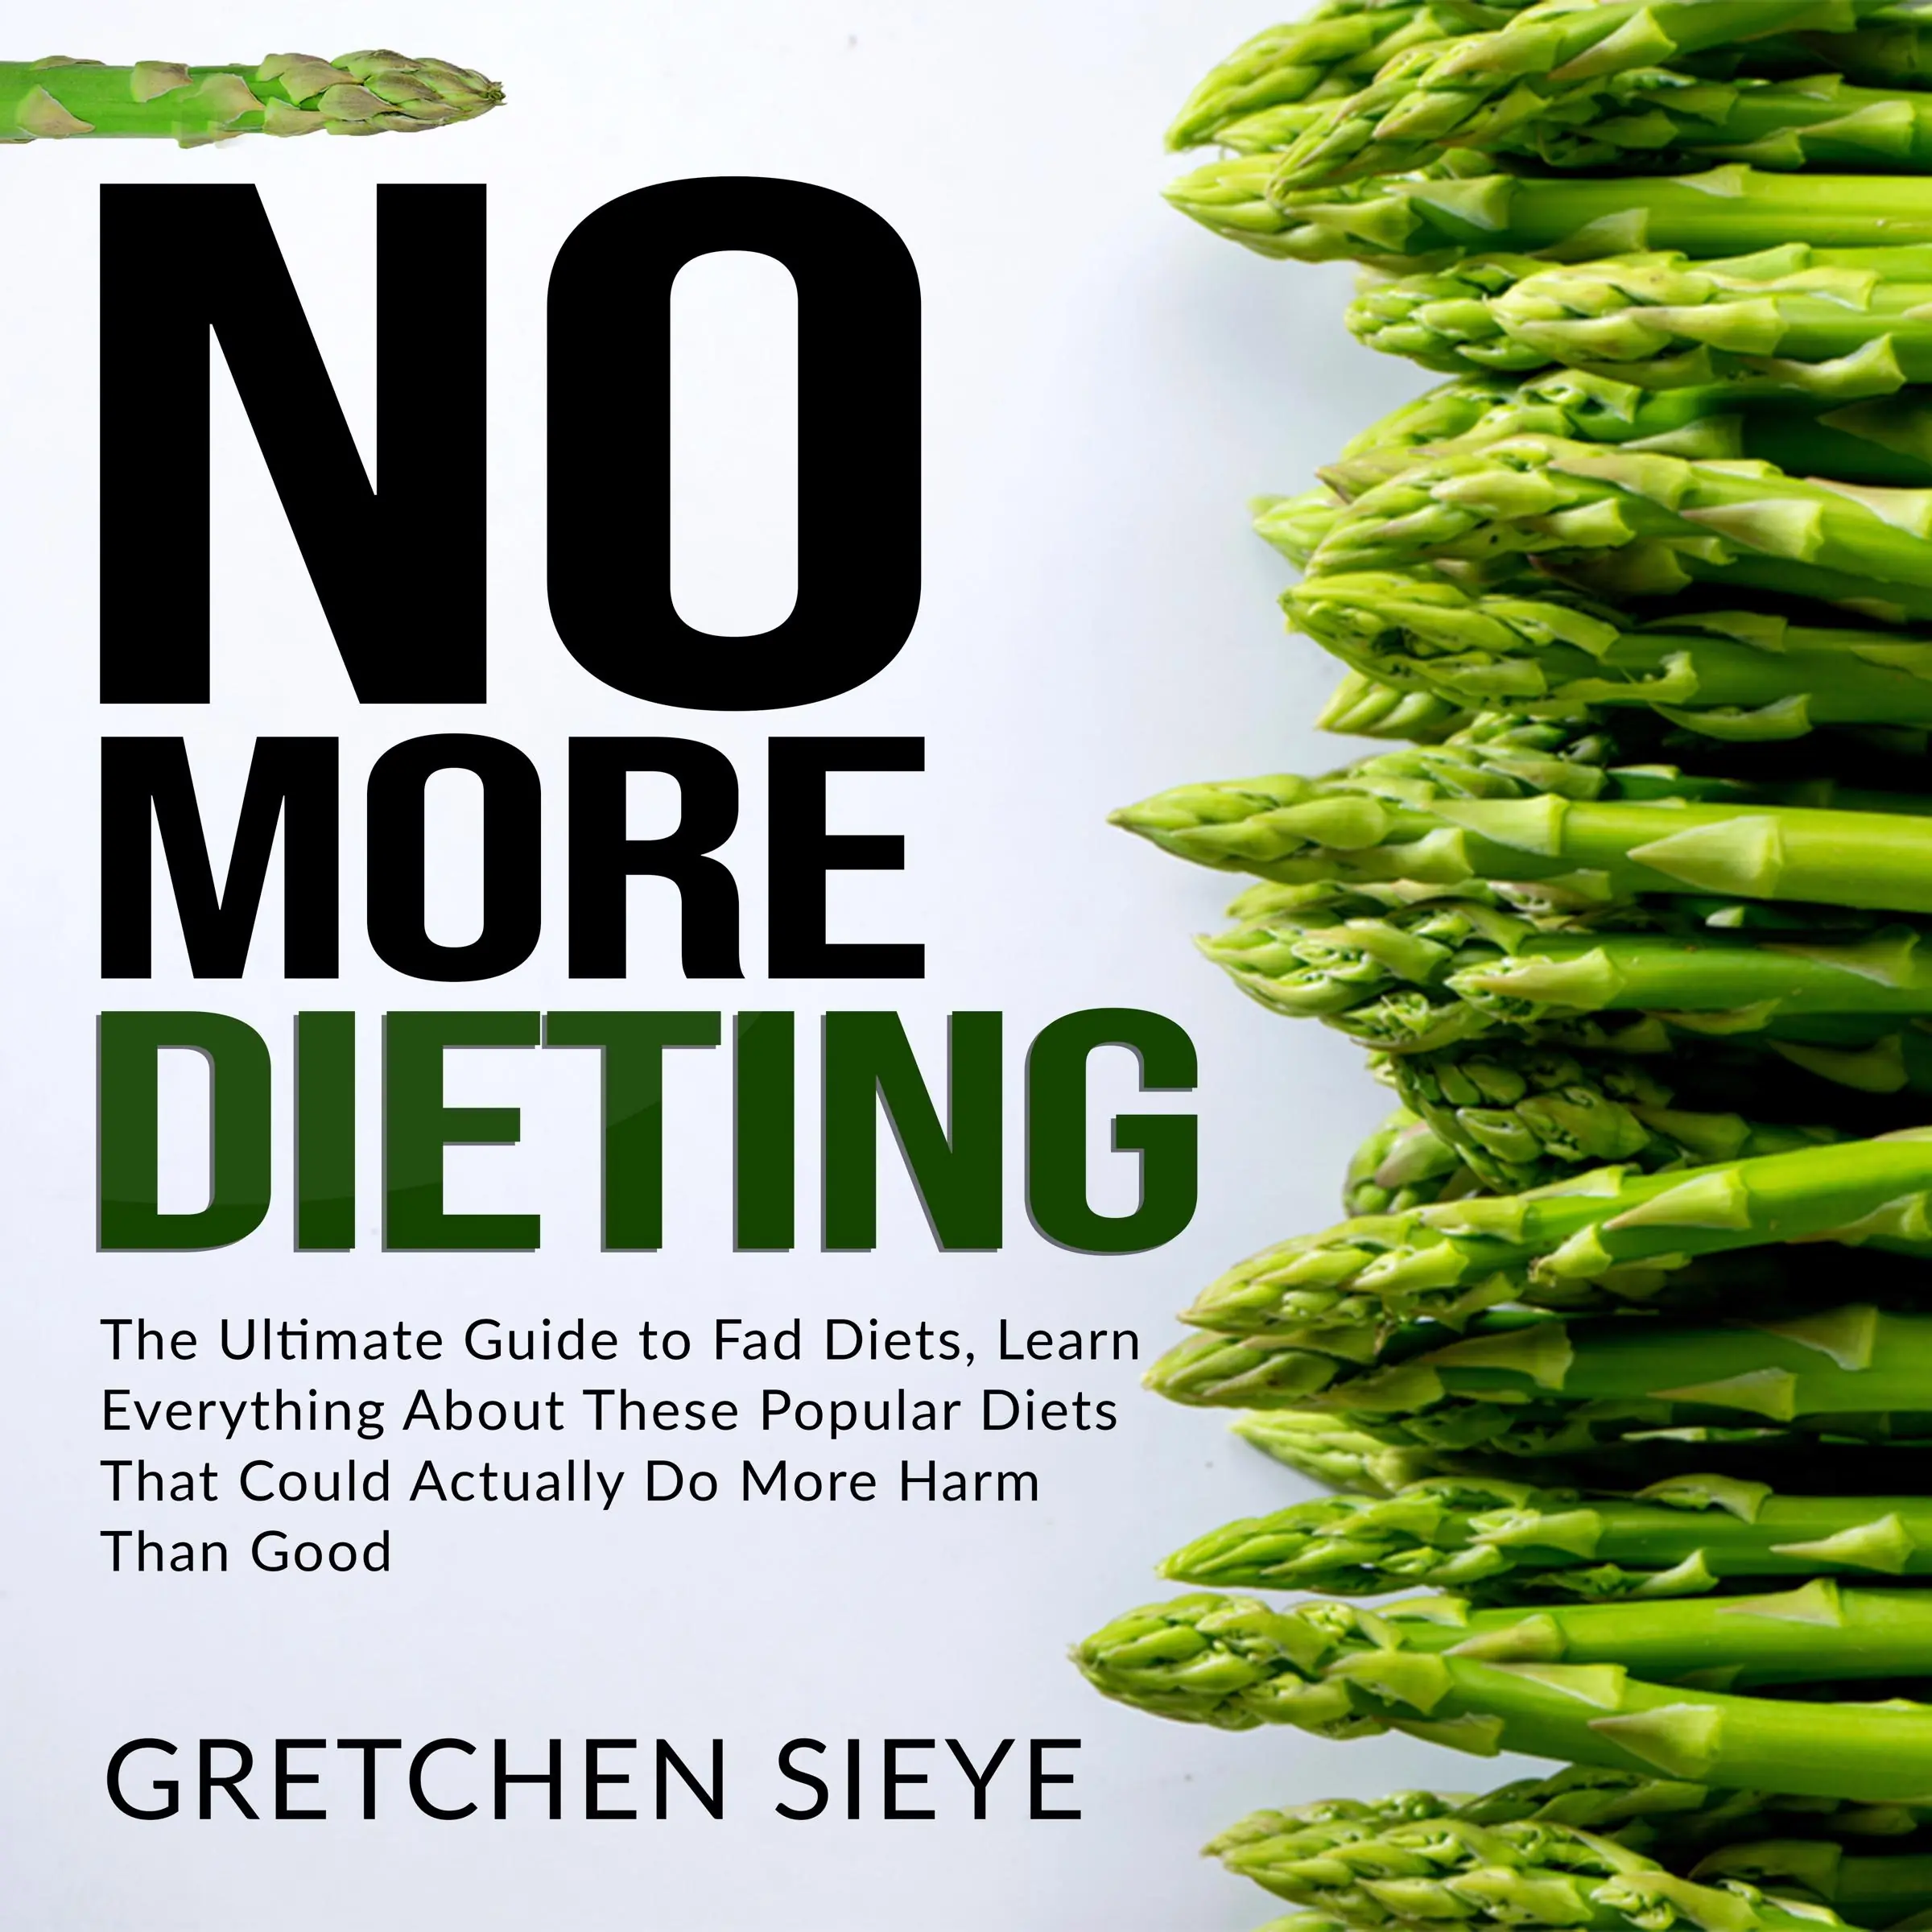 No More Dieting: The Ultimate Guide to Fad Diets, Learn Everything About These Popular Diets That Could Actually Do More Harm Than Good. Audiobook by Gretchen Sieye